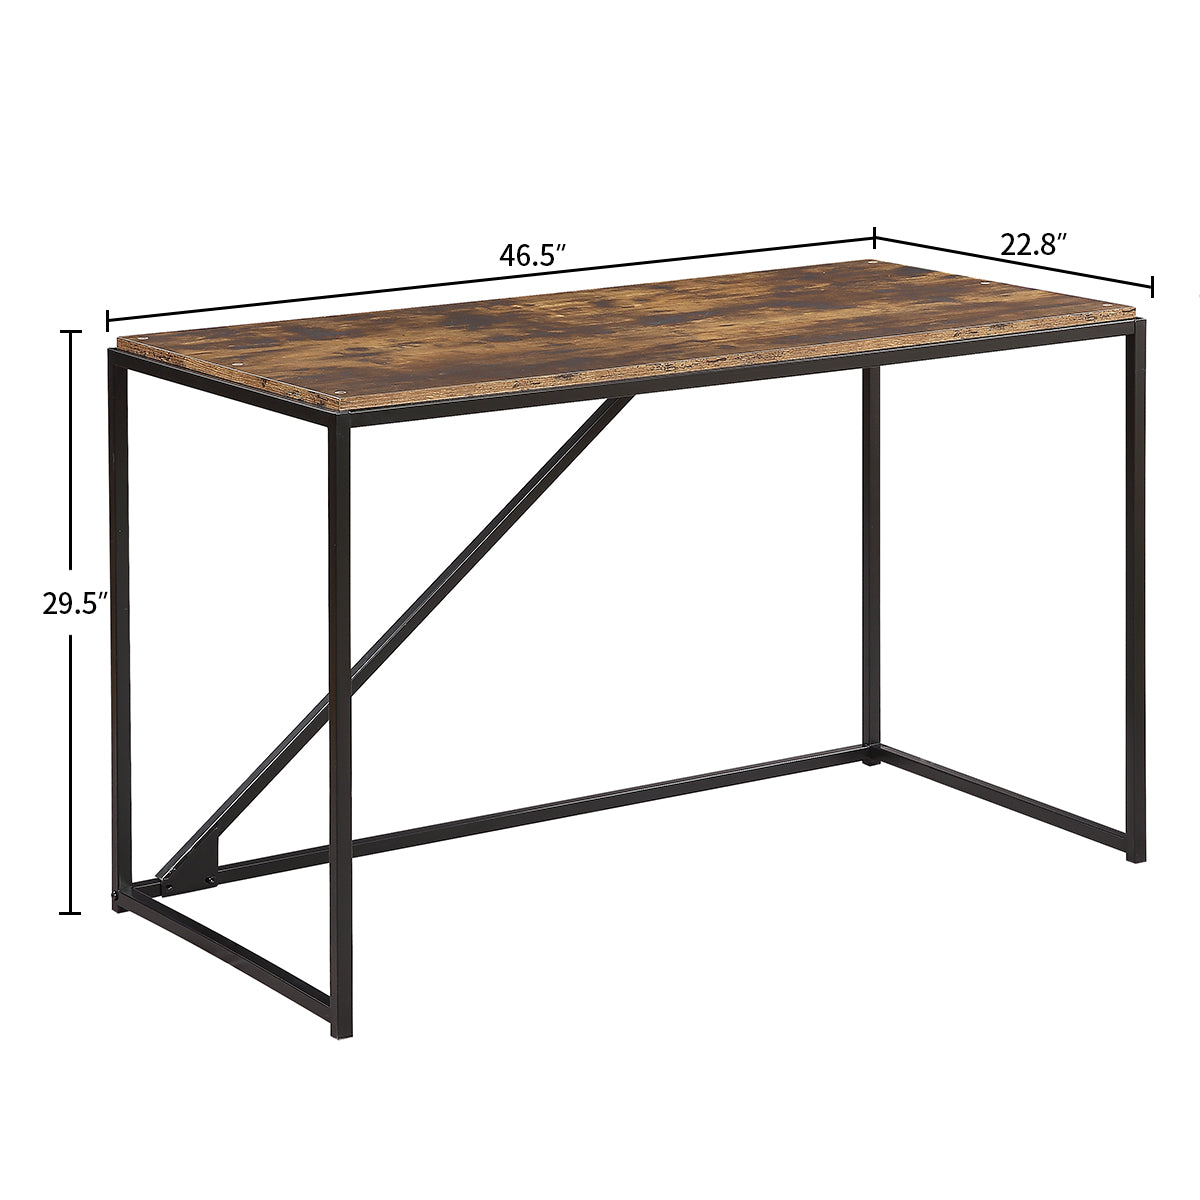 Home Office 46-Inch Computer Desk, Small Desk Home Office Study Desk Metal Frame, Modern Simple Laptop Table, Easy Assembly, Industrial Style